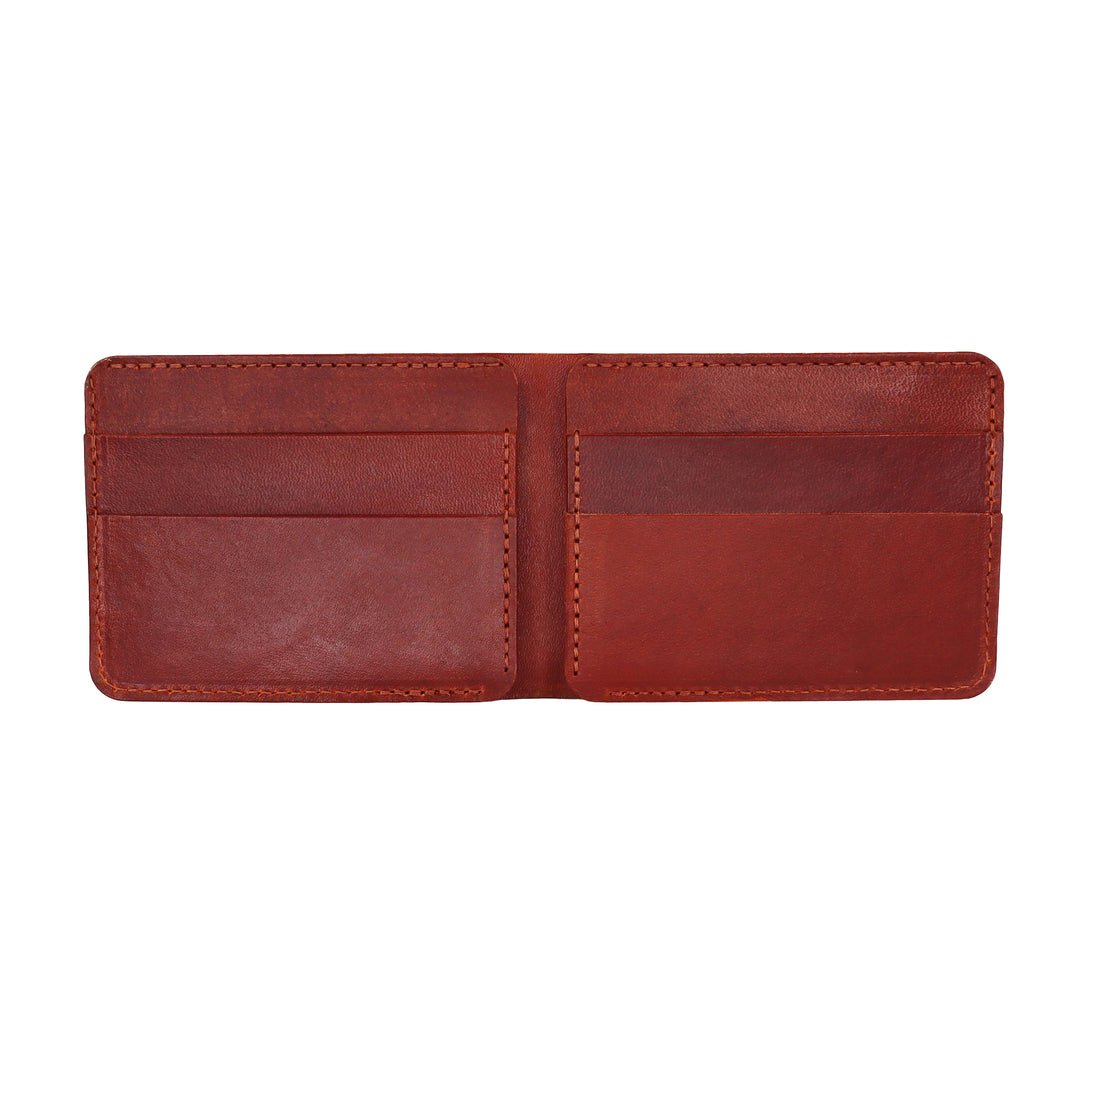 The interior of a brown bi-fold leather wallet. The Leather Bi-Fold Wallet in Brown is designed and handcrafted by Hold Supply in Anaheim, California.